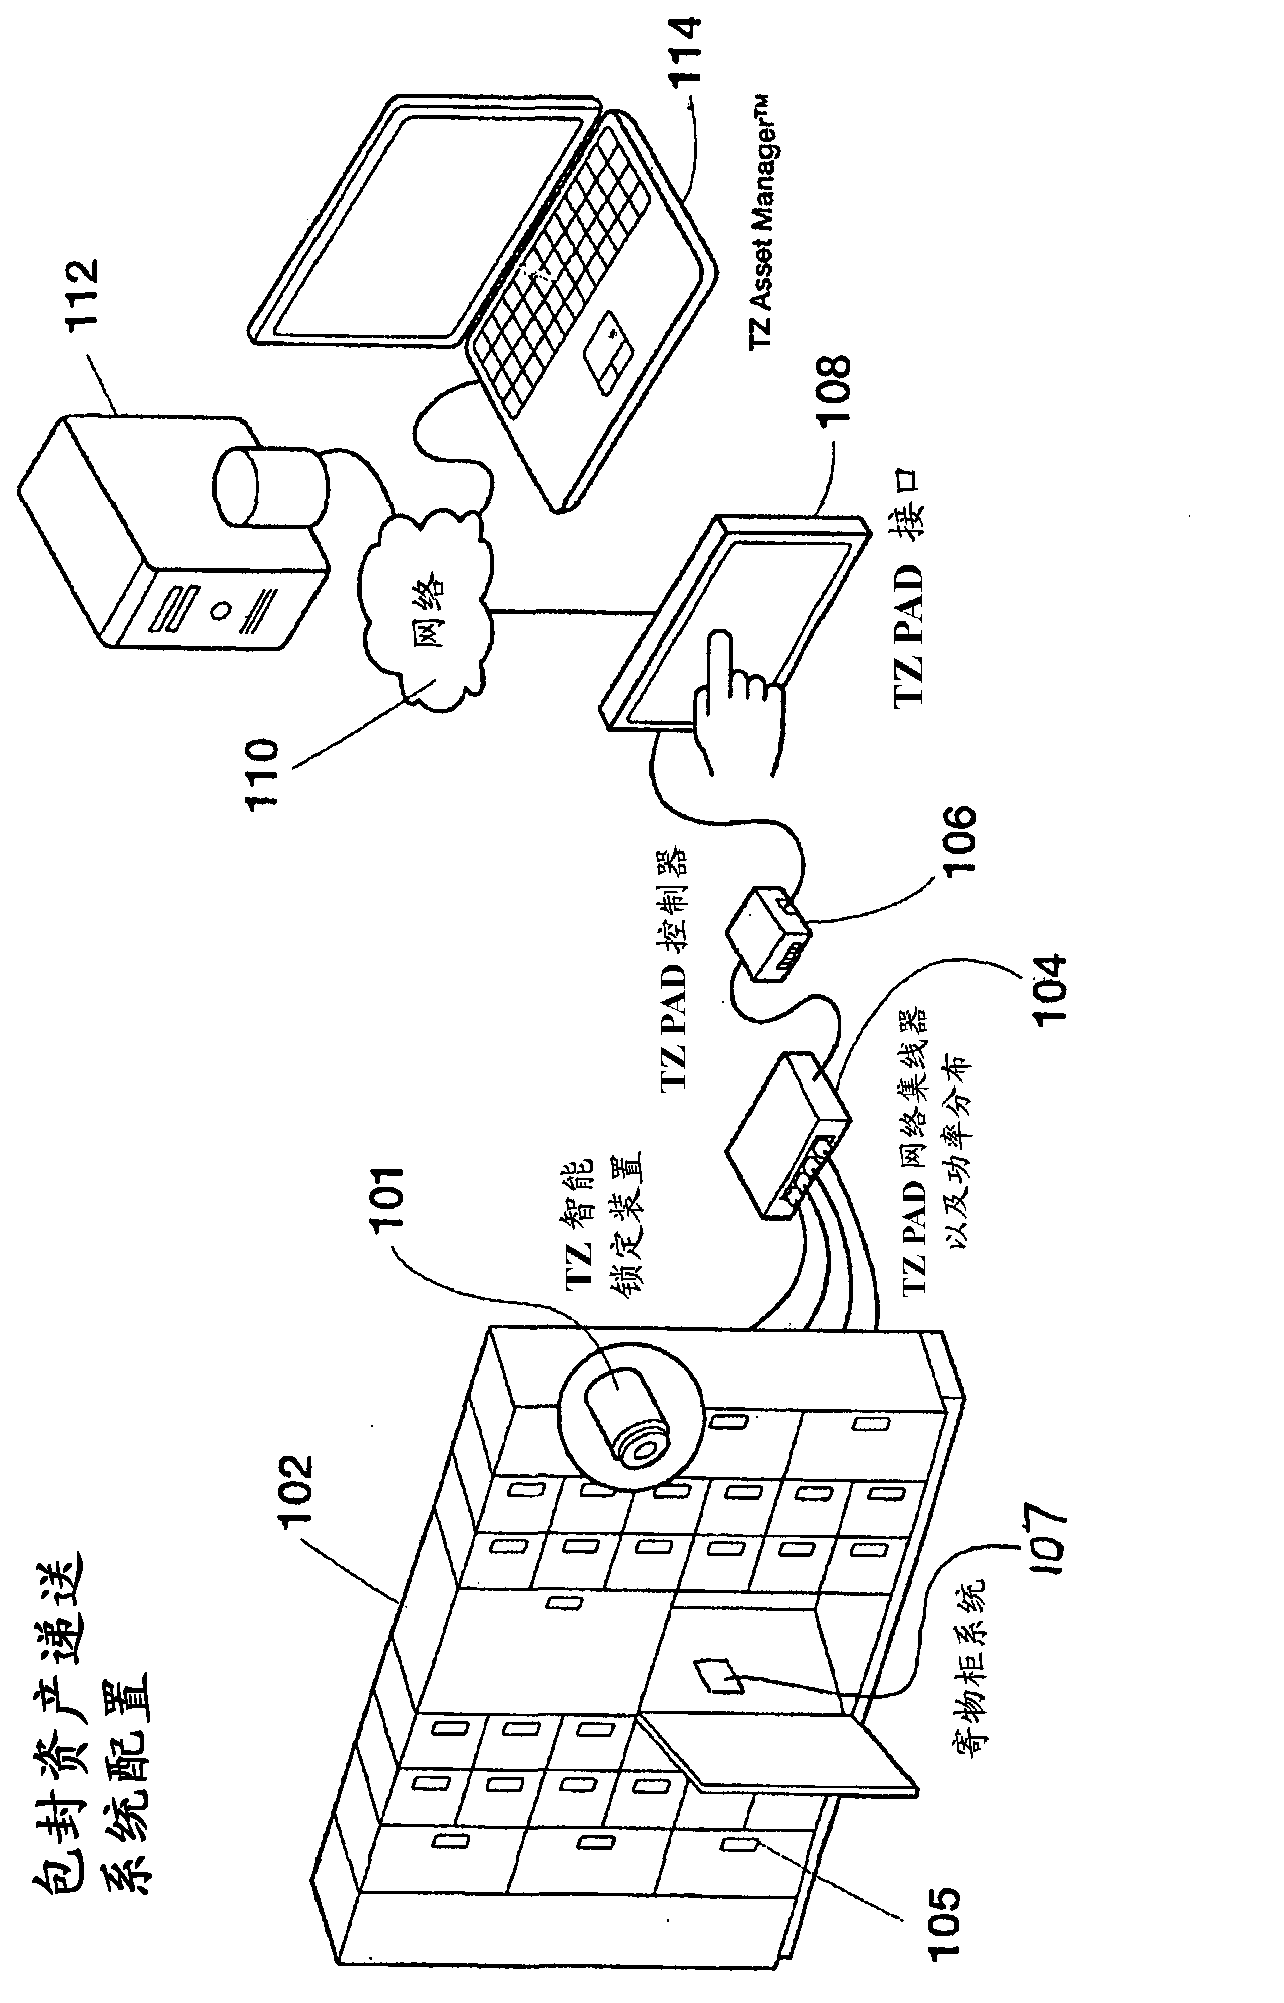 Systems and methods for accessing or managing secured storage space